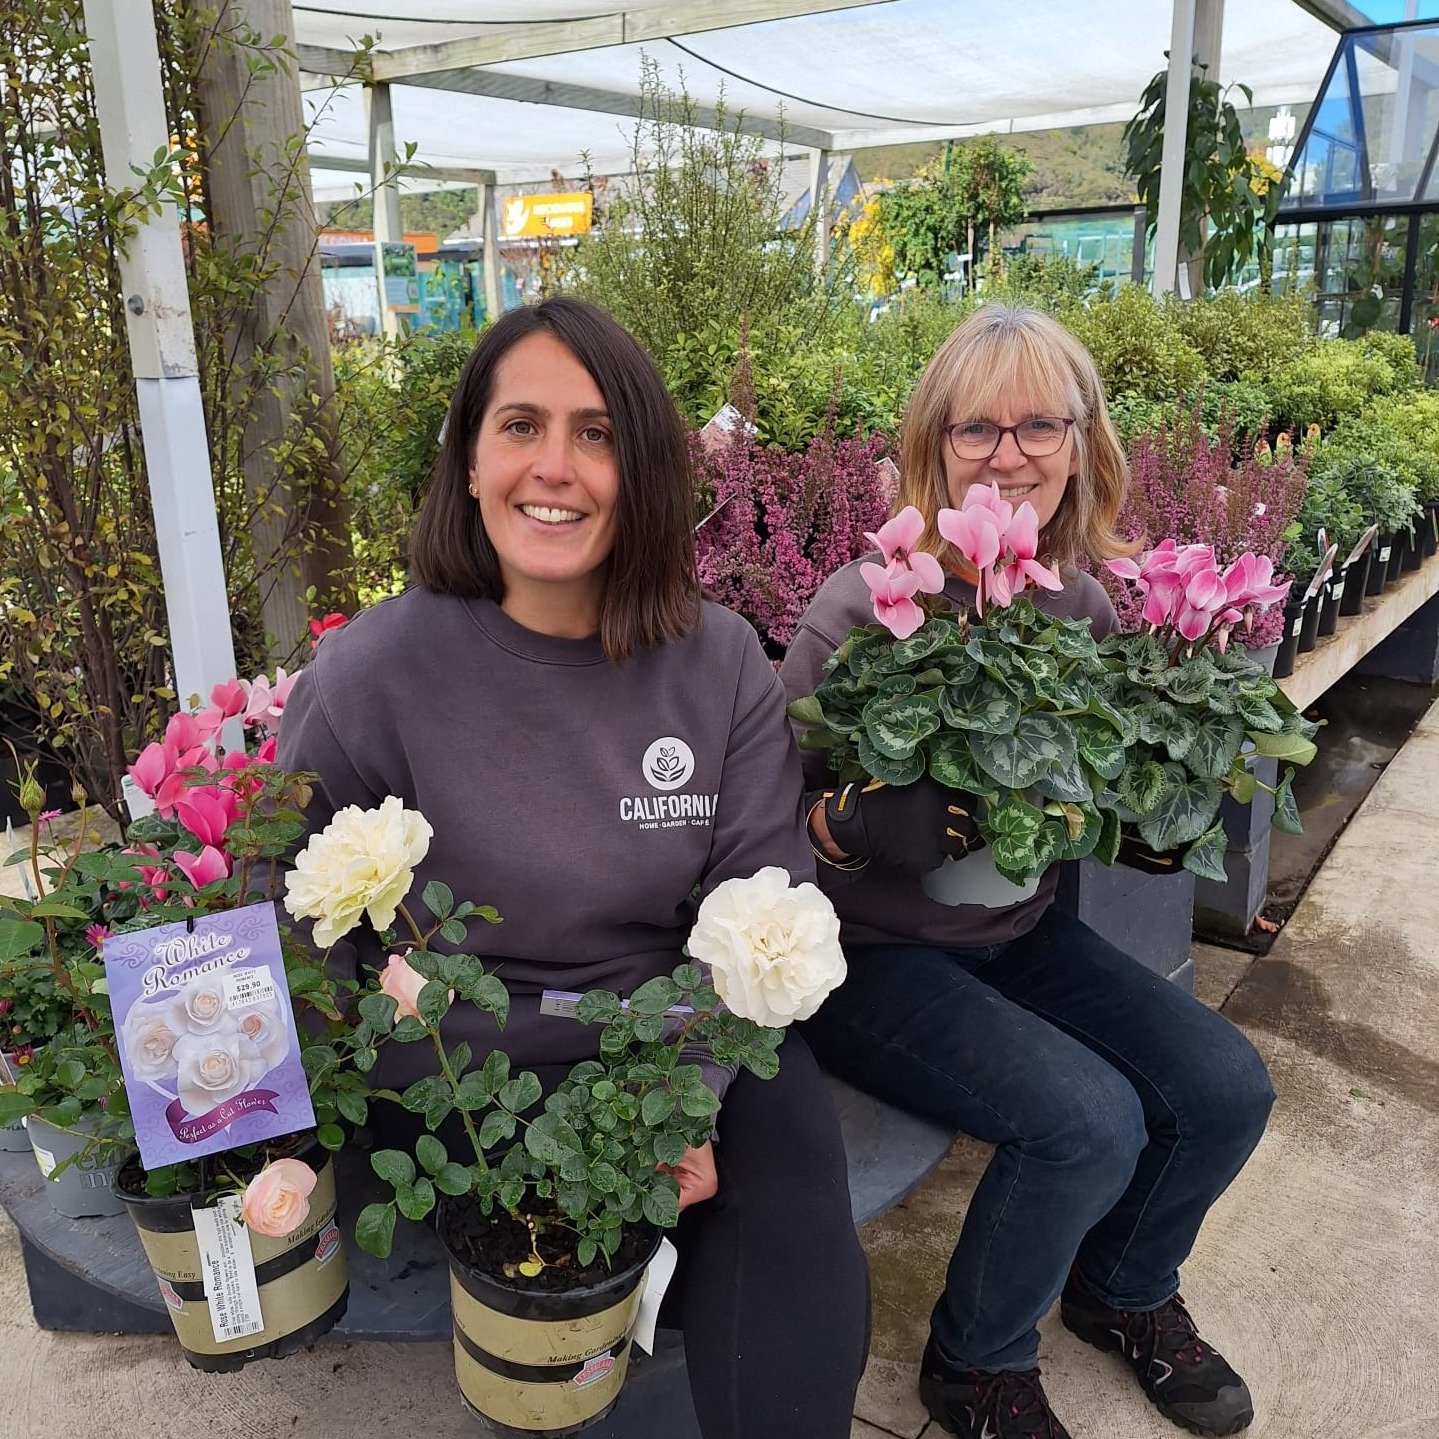 🌷 Surprise your special lady with some beautiful blooms this weekend! How about these White Romance Roses or blushing Cyclamen.

We have a bunch of the last-minute Mother's Day ideas in-store, from Morris &amp; James Pottery, Lothlorian scarves and 